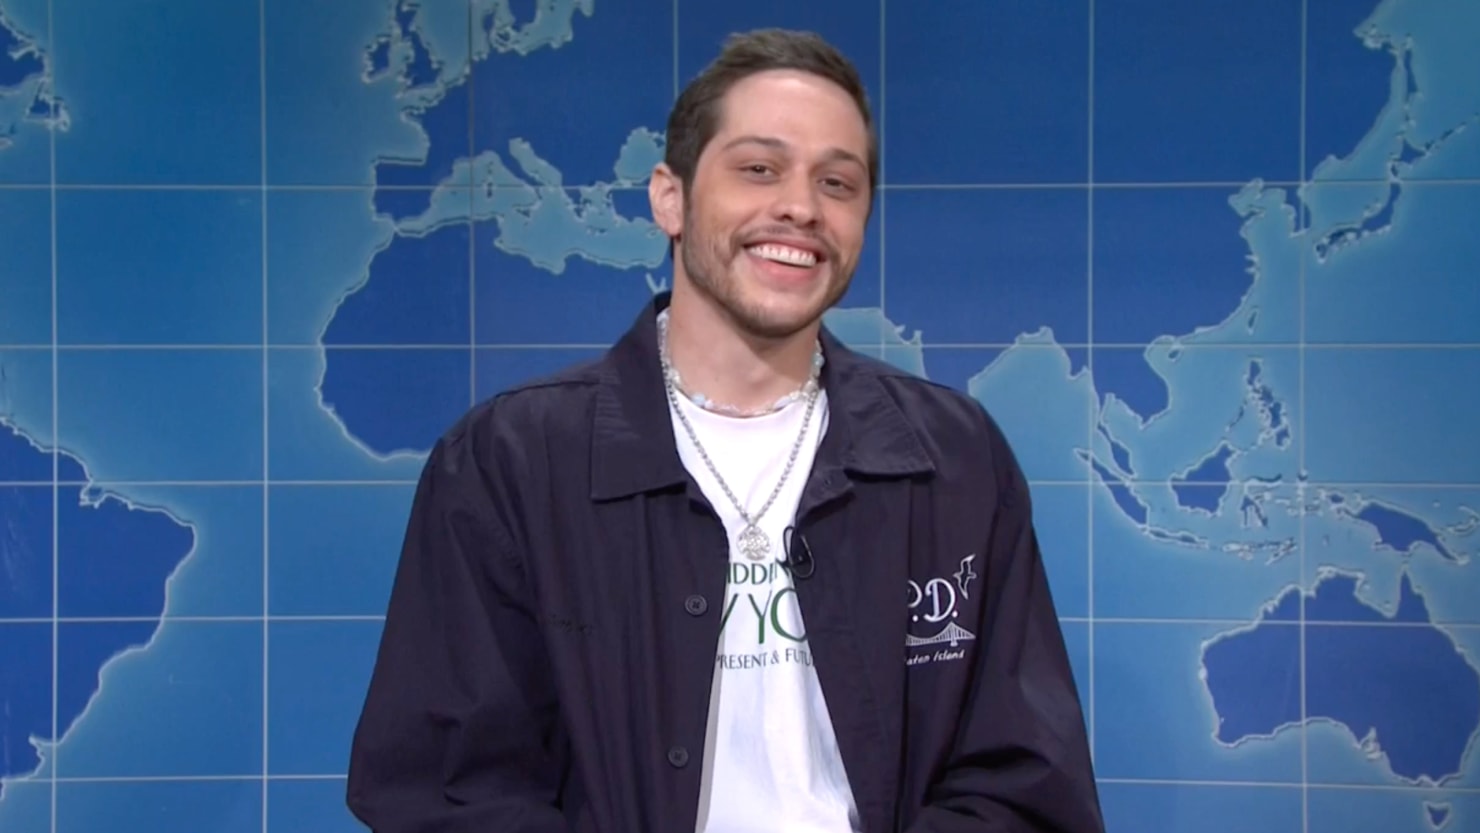 Pete Davidson Throws One Final Dig At Kanye West & Ariana Grande As He Yeets Himself Off SNL